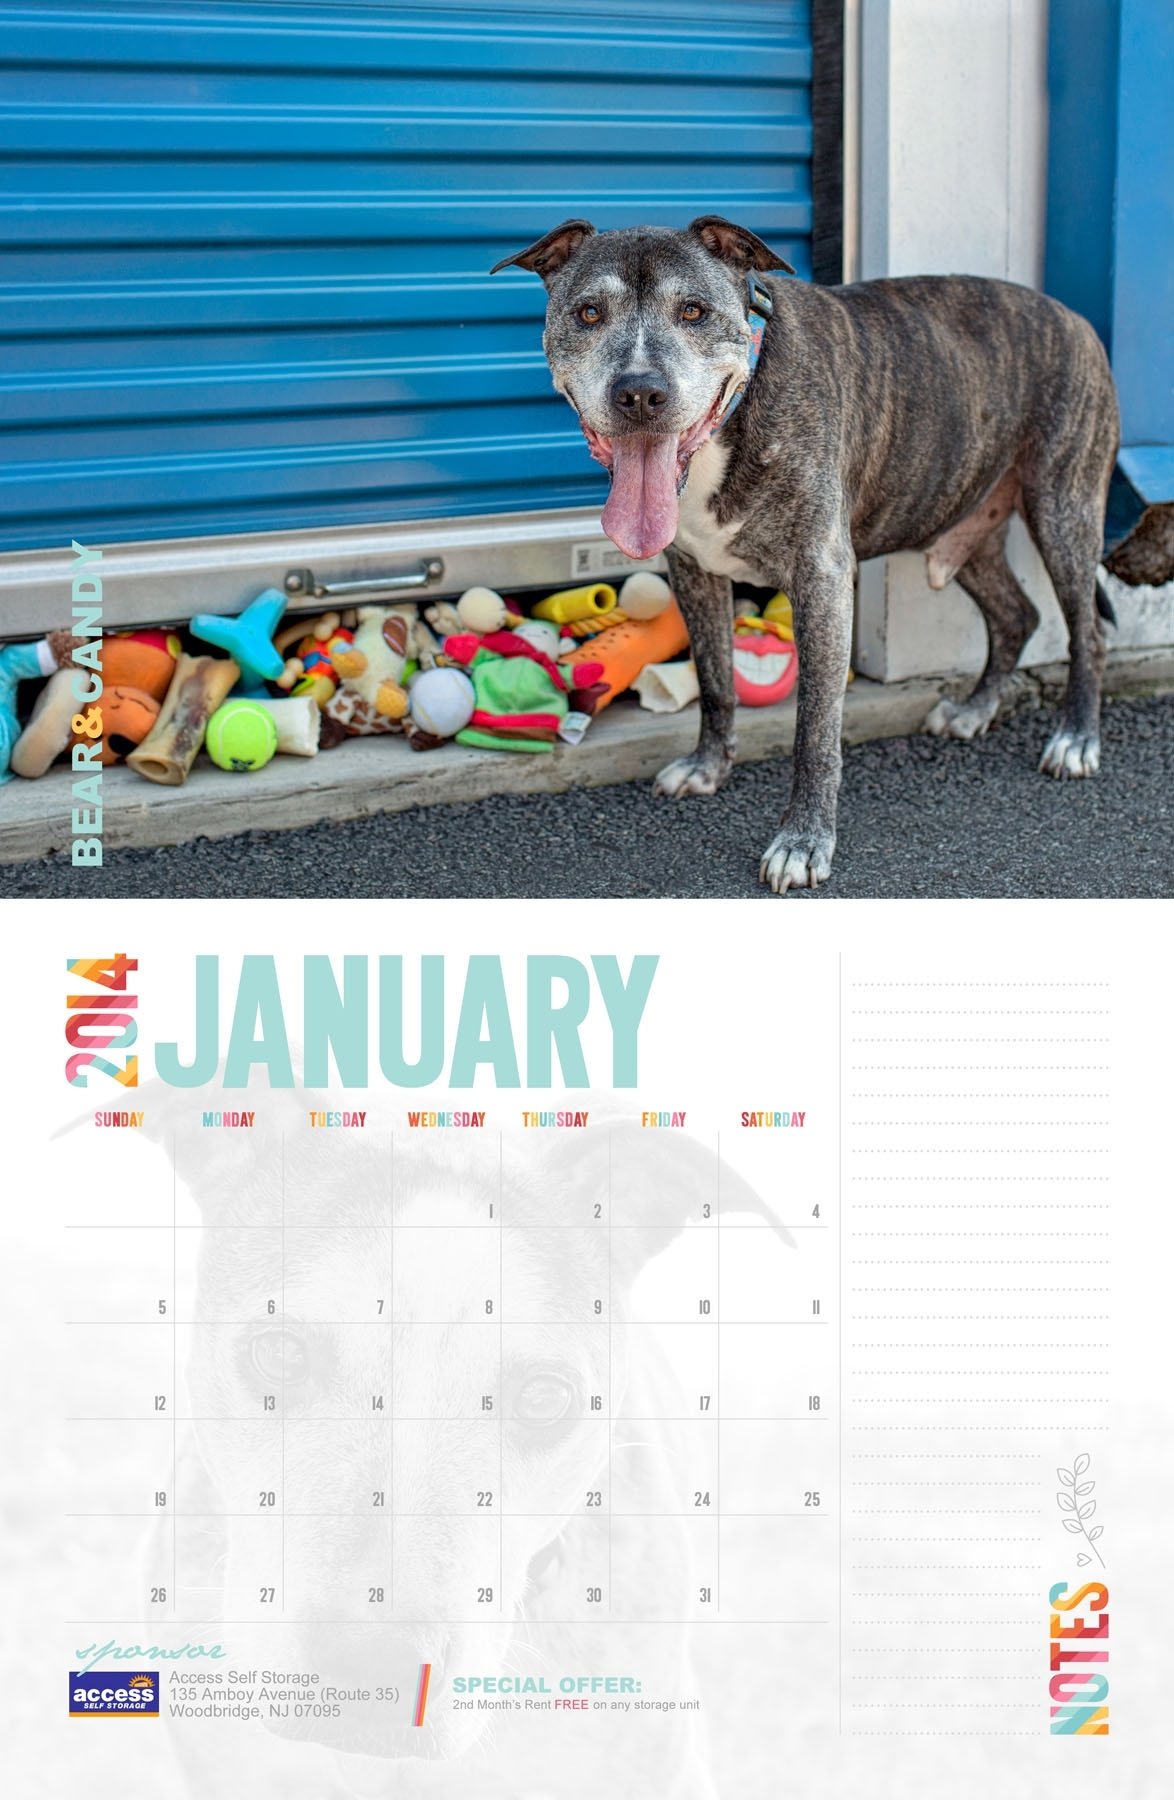 10 Most Recommended Fundraising Ideas For Animal Shelters calendar fundraising idea for animal shelters rescues 2022